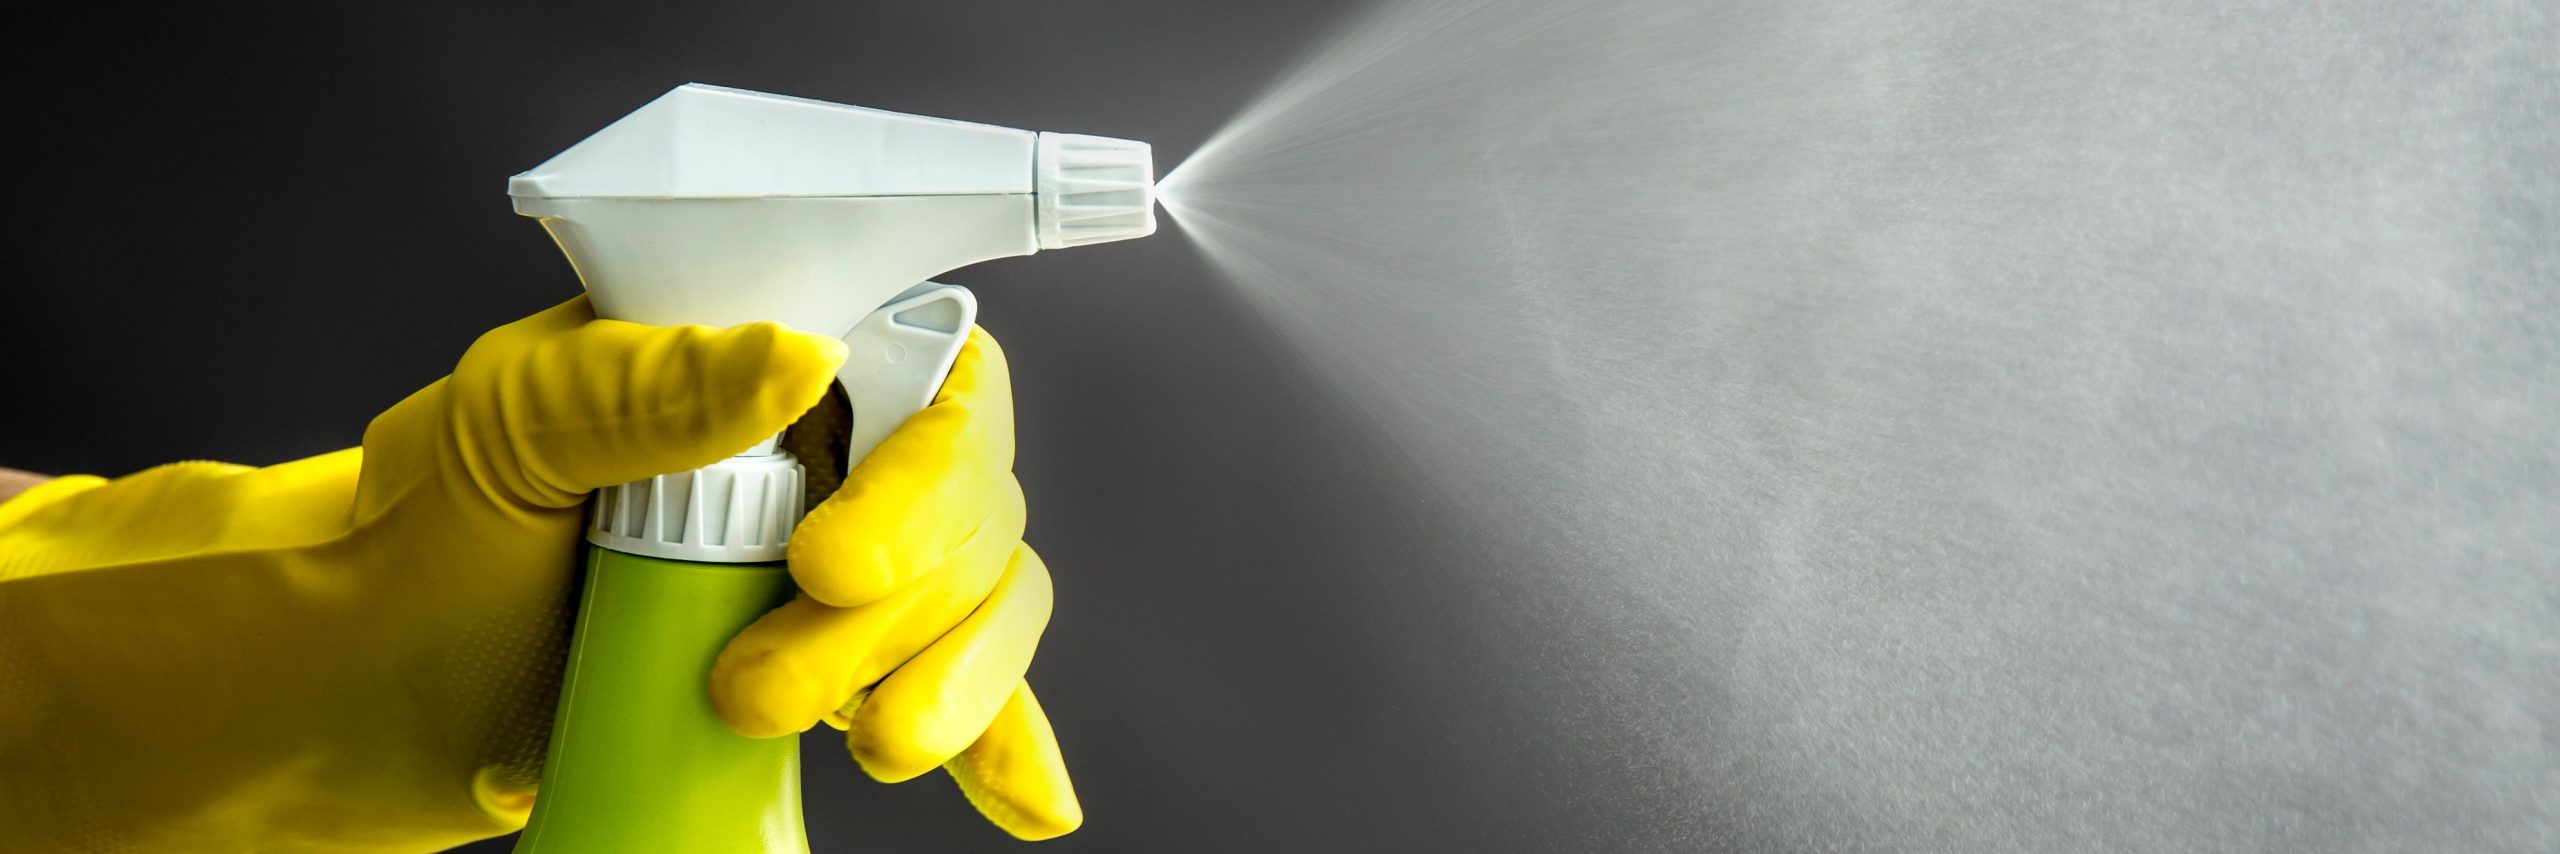 Household Disinfectants and Cleaning Products Use, Including Green Products, Linked to Uncontrolled Asthma